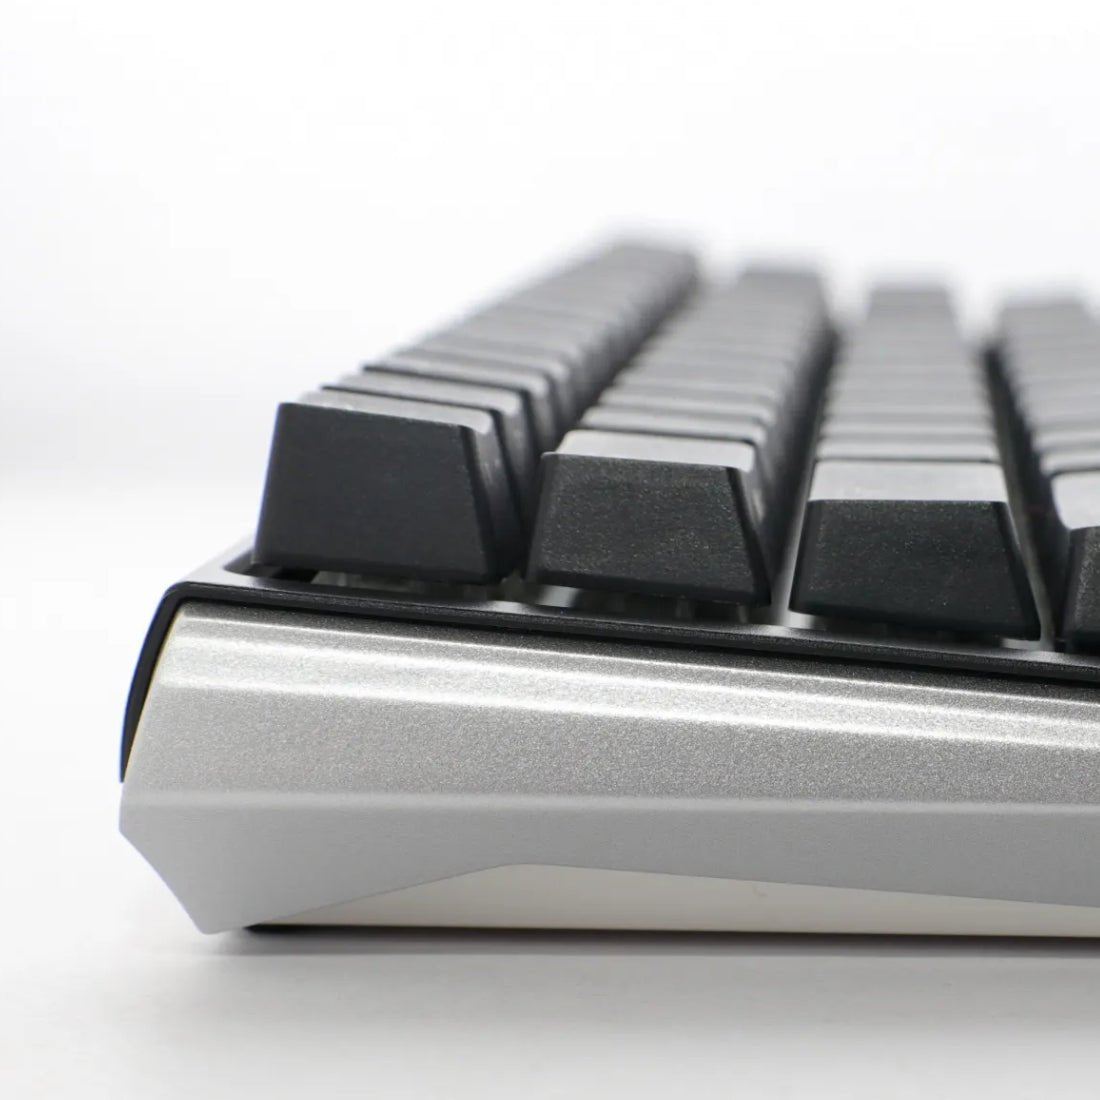 Ducky One 3 SF Classic Mechanical Keyboard - Cherry Brown - Store 974 | ستور ٩٧٤